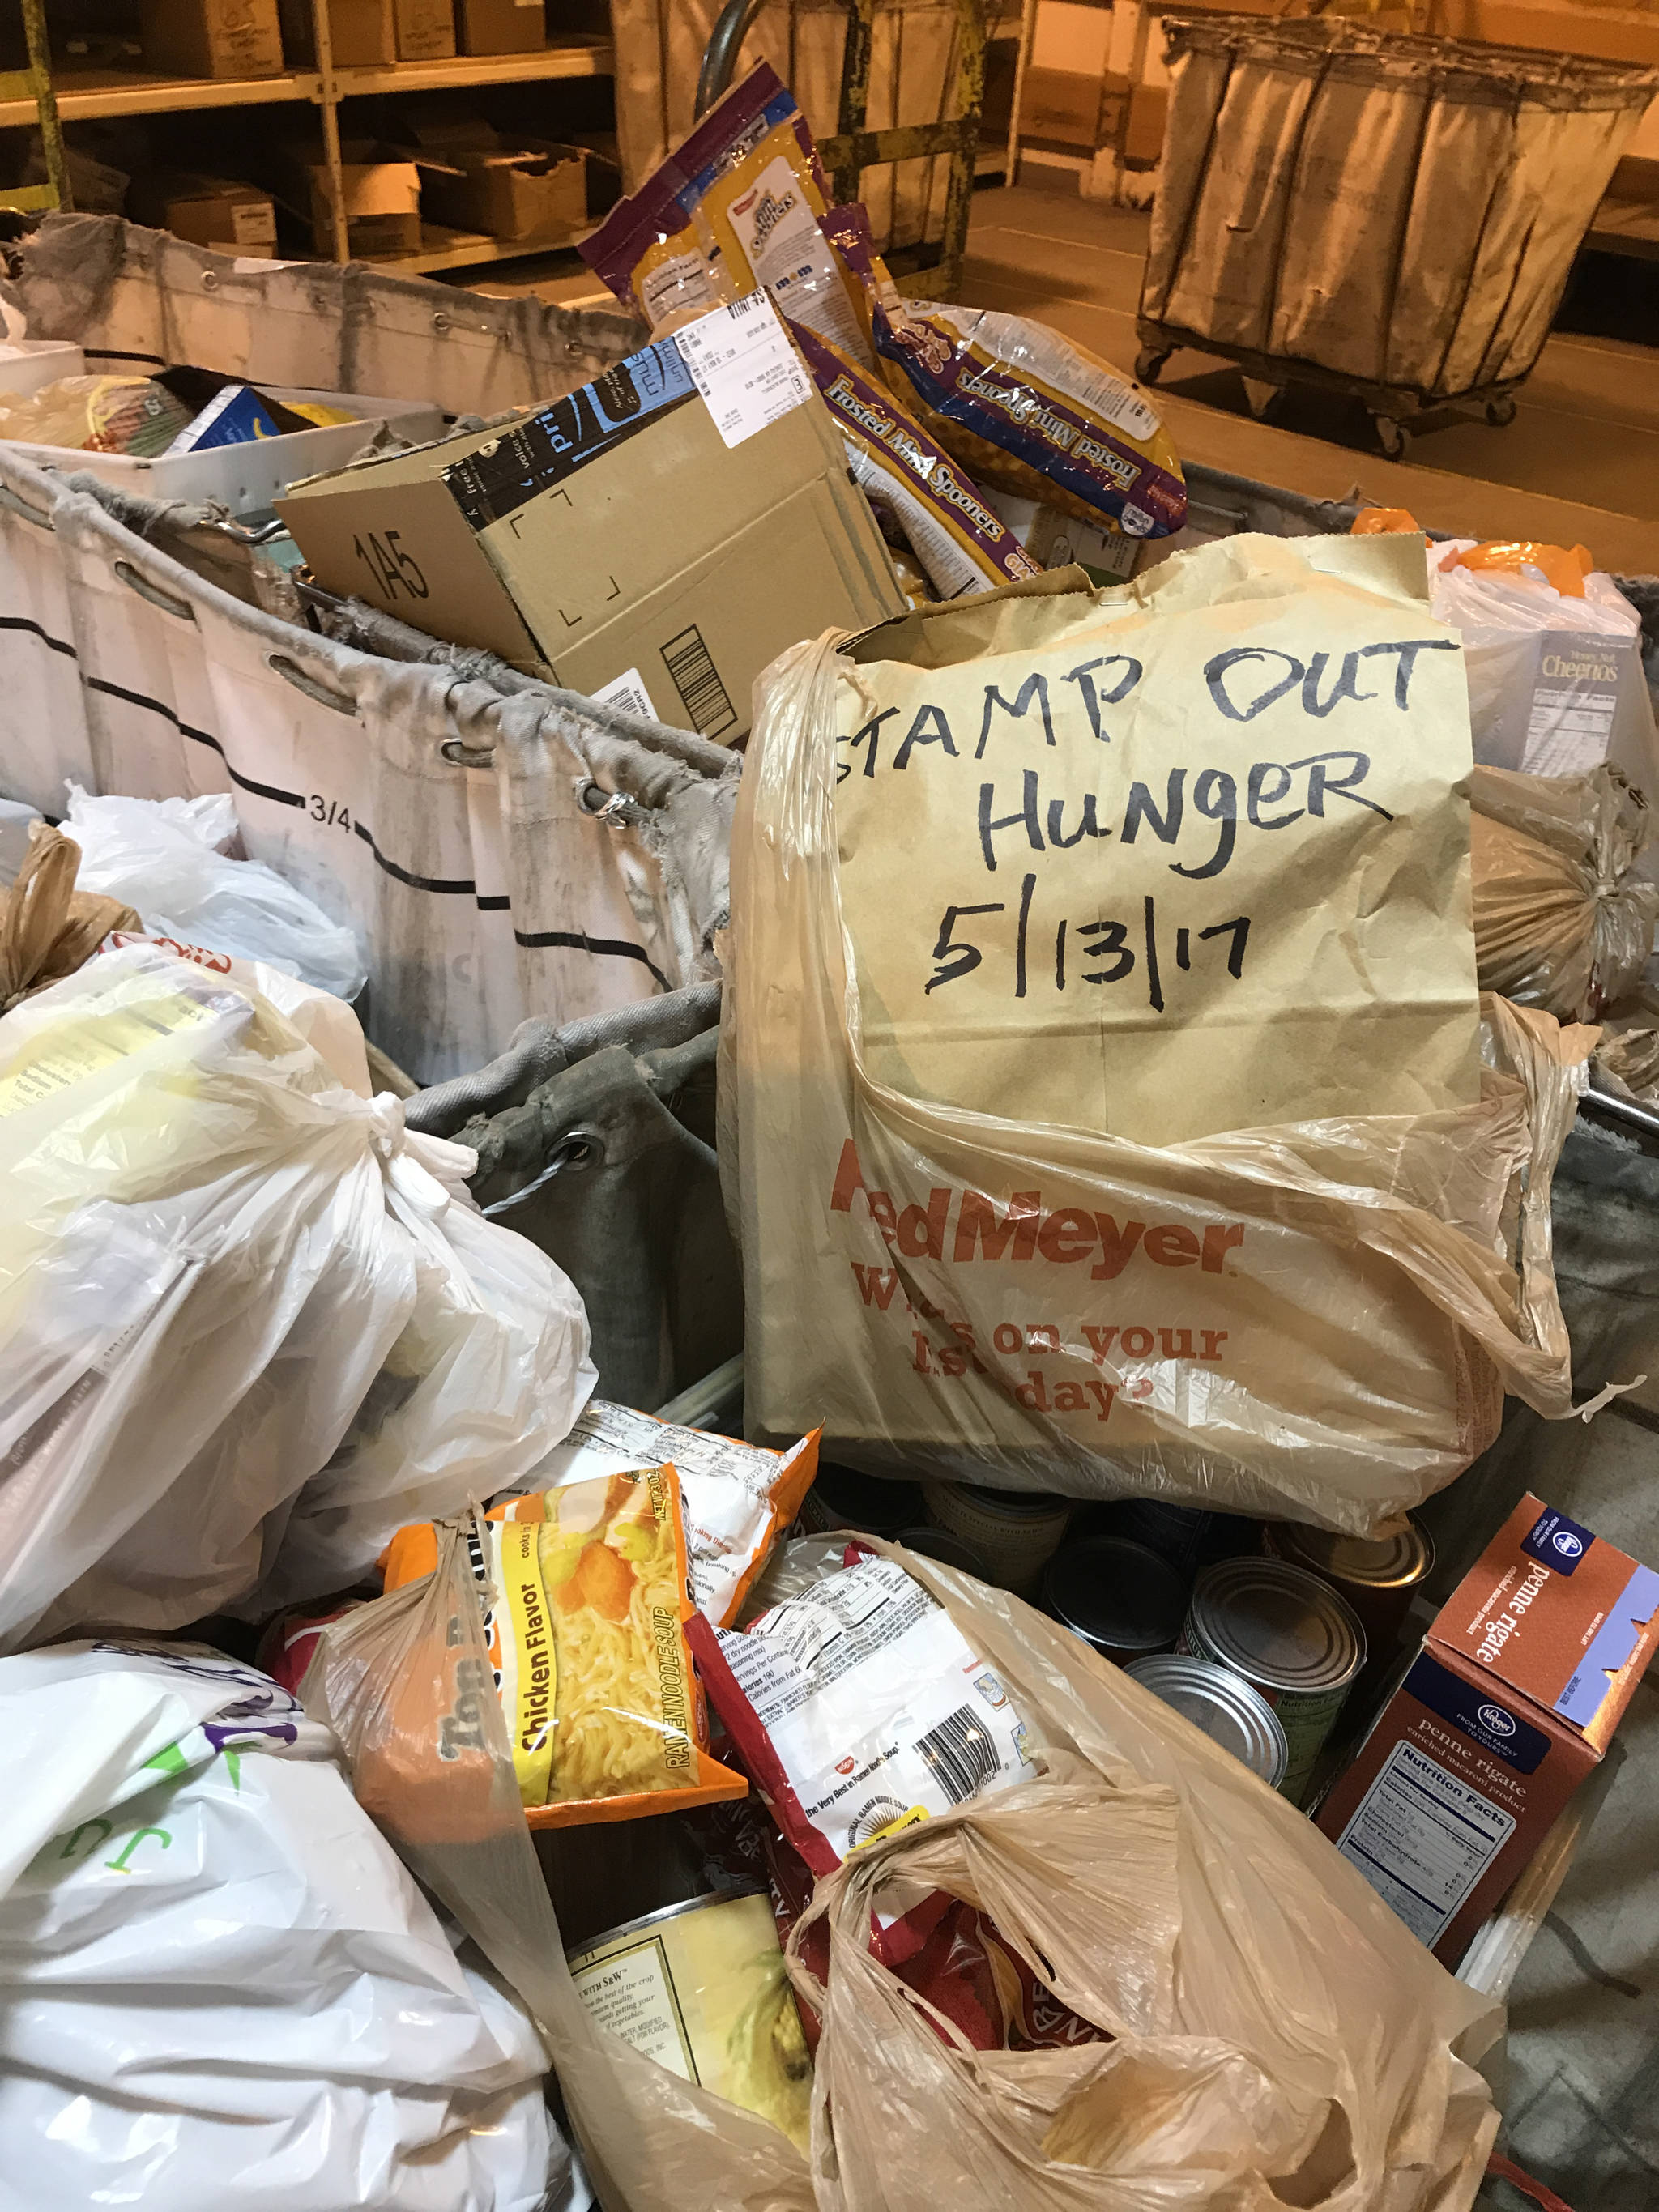 Thank you for helping stamp out hunger